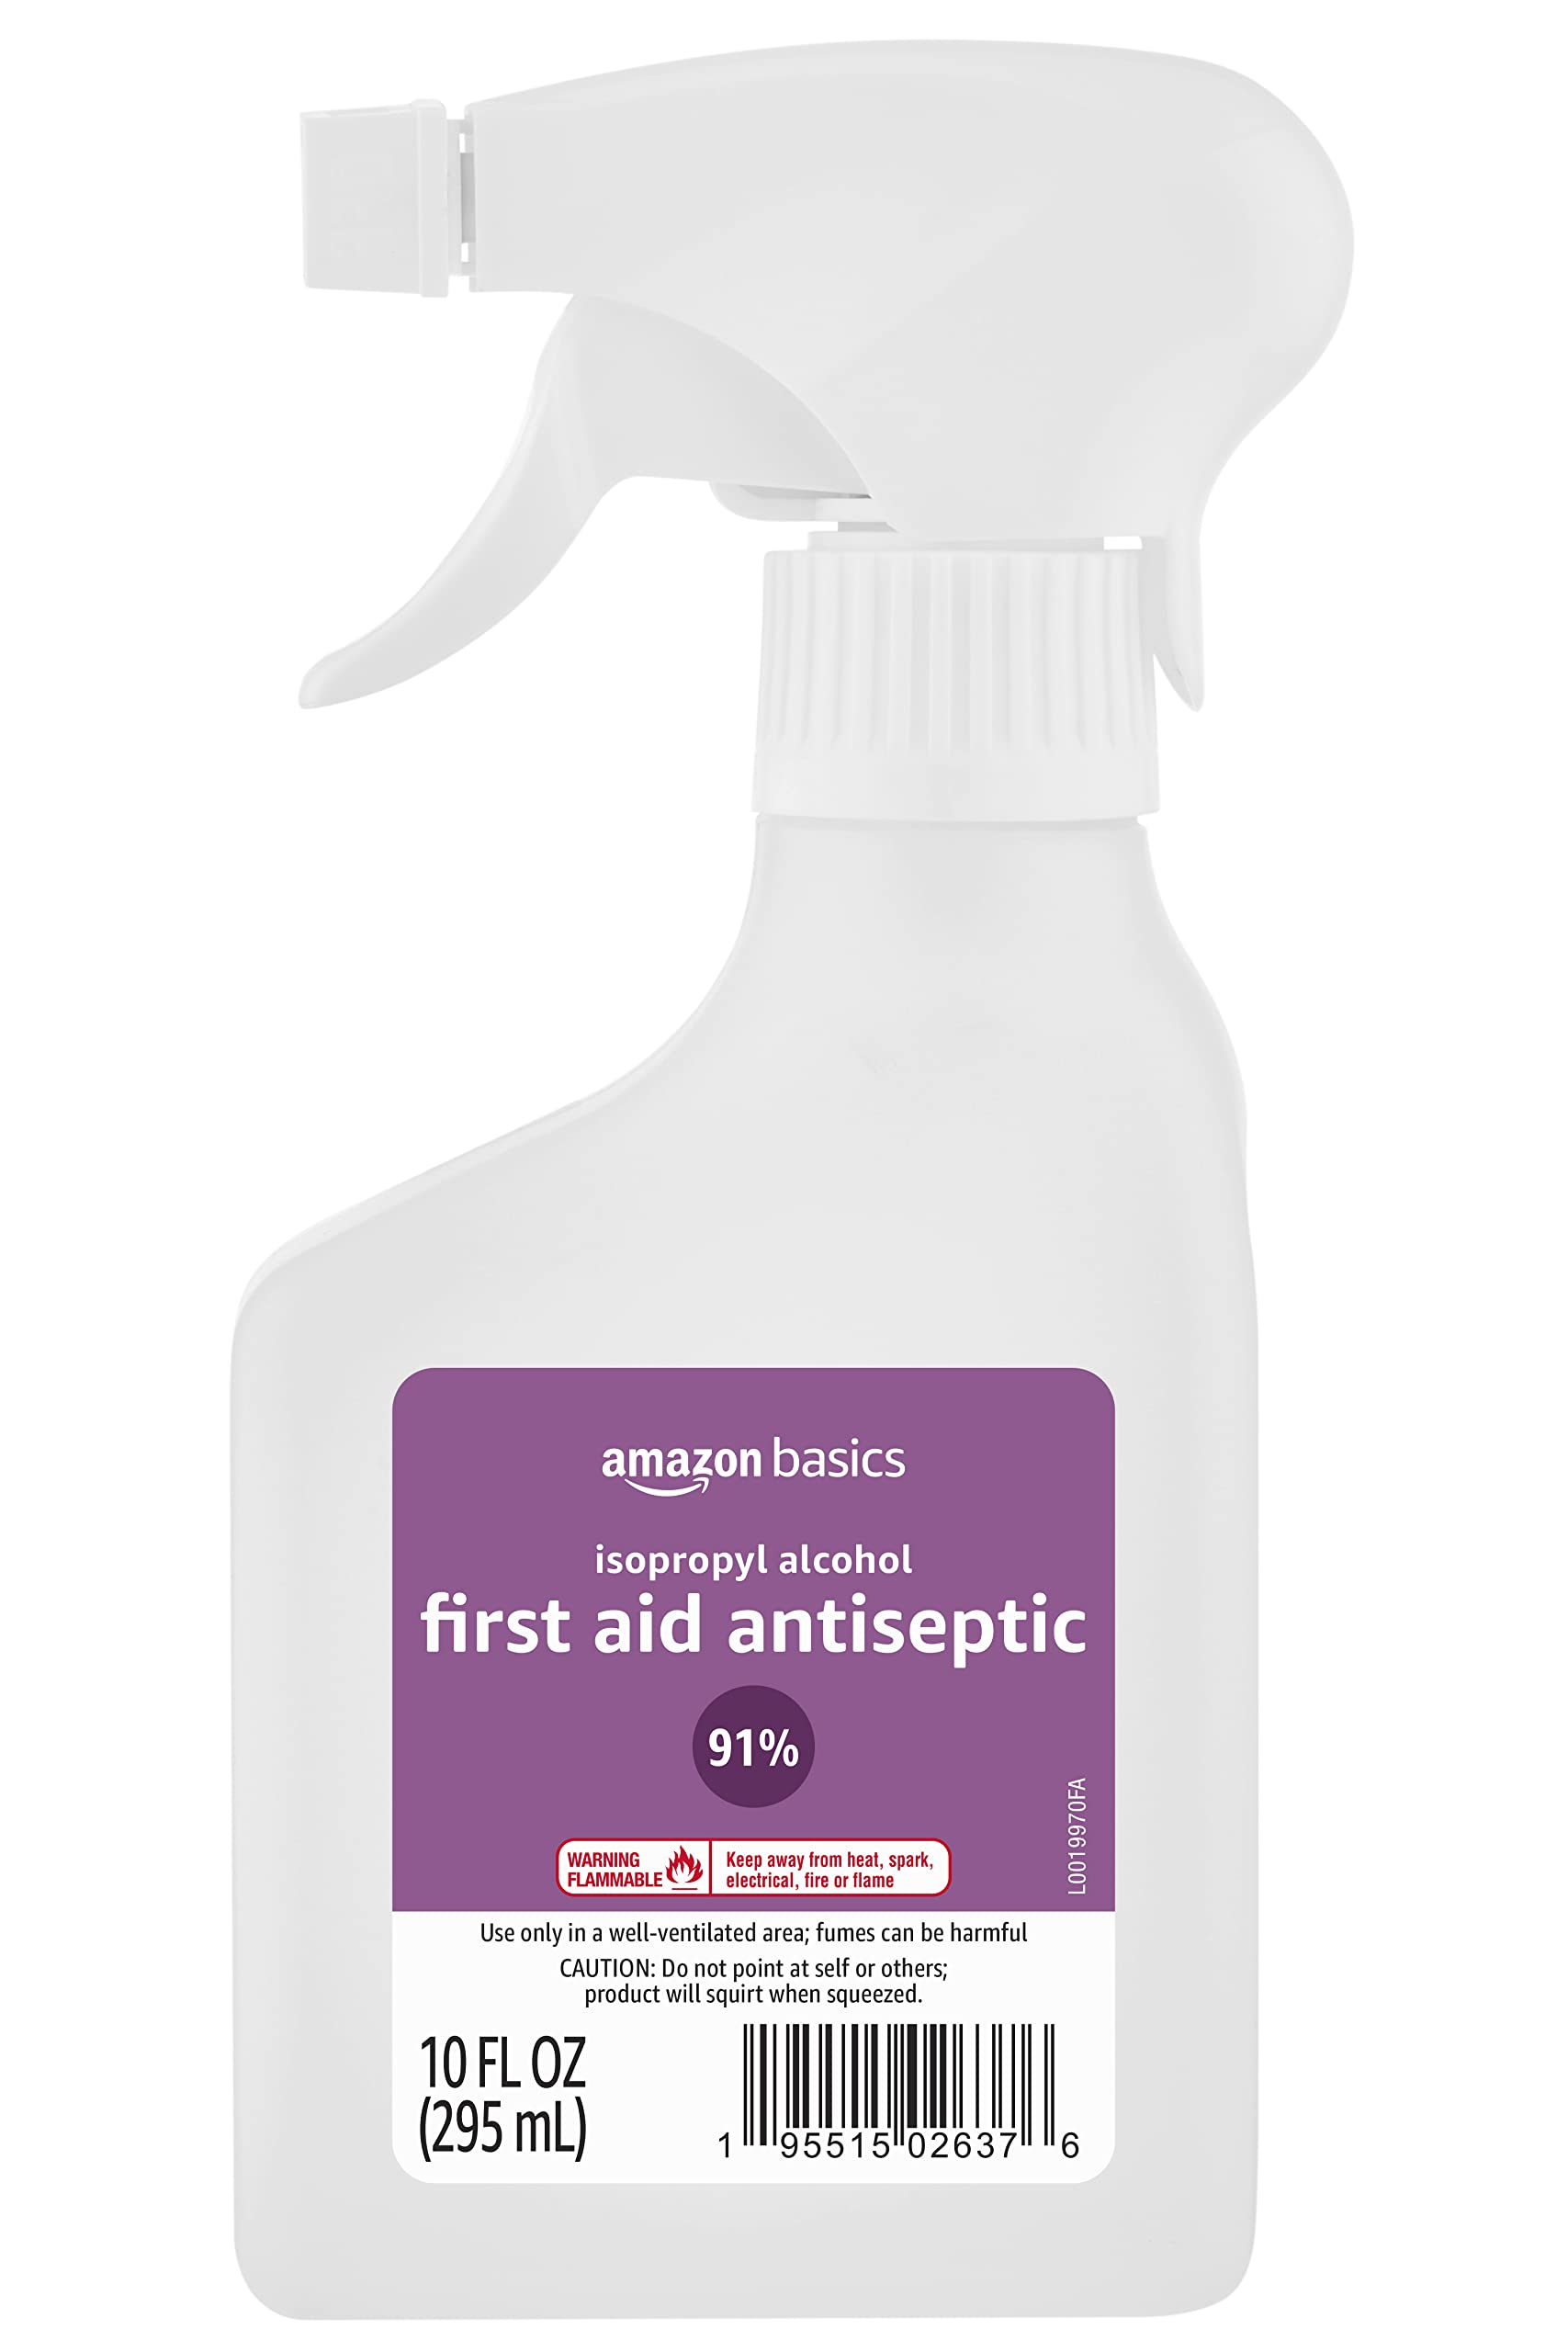 Basics 91% Isopropyl Alcohol First Aid Antiseptic Spray Bottle 10  Fluid Ounces 1-Pack (Previously Solimo) 10 Fl Oz (Pack of 1)